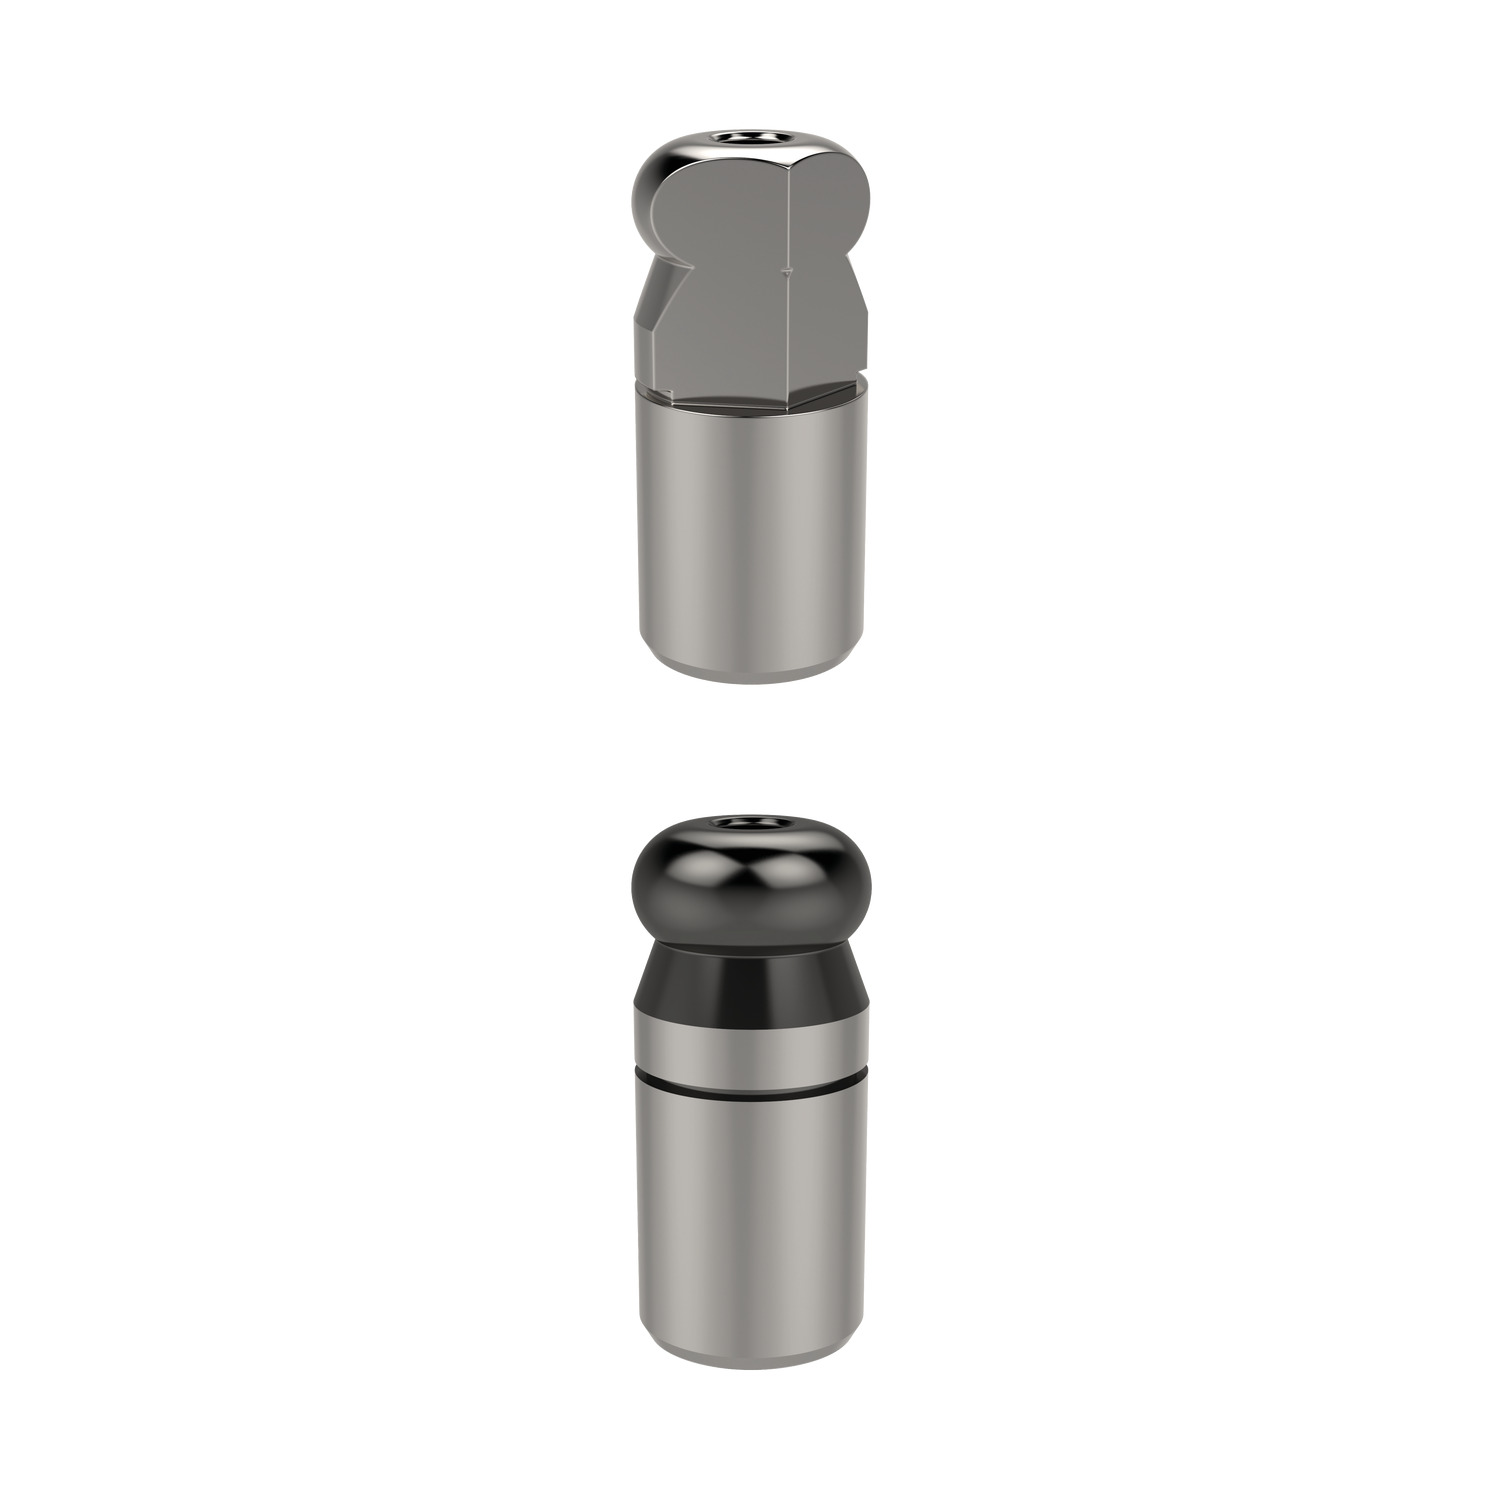 36341.W0570 Location Pins, Non-Stepped Stainless Steel - Plain - 10 - 10